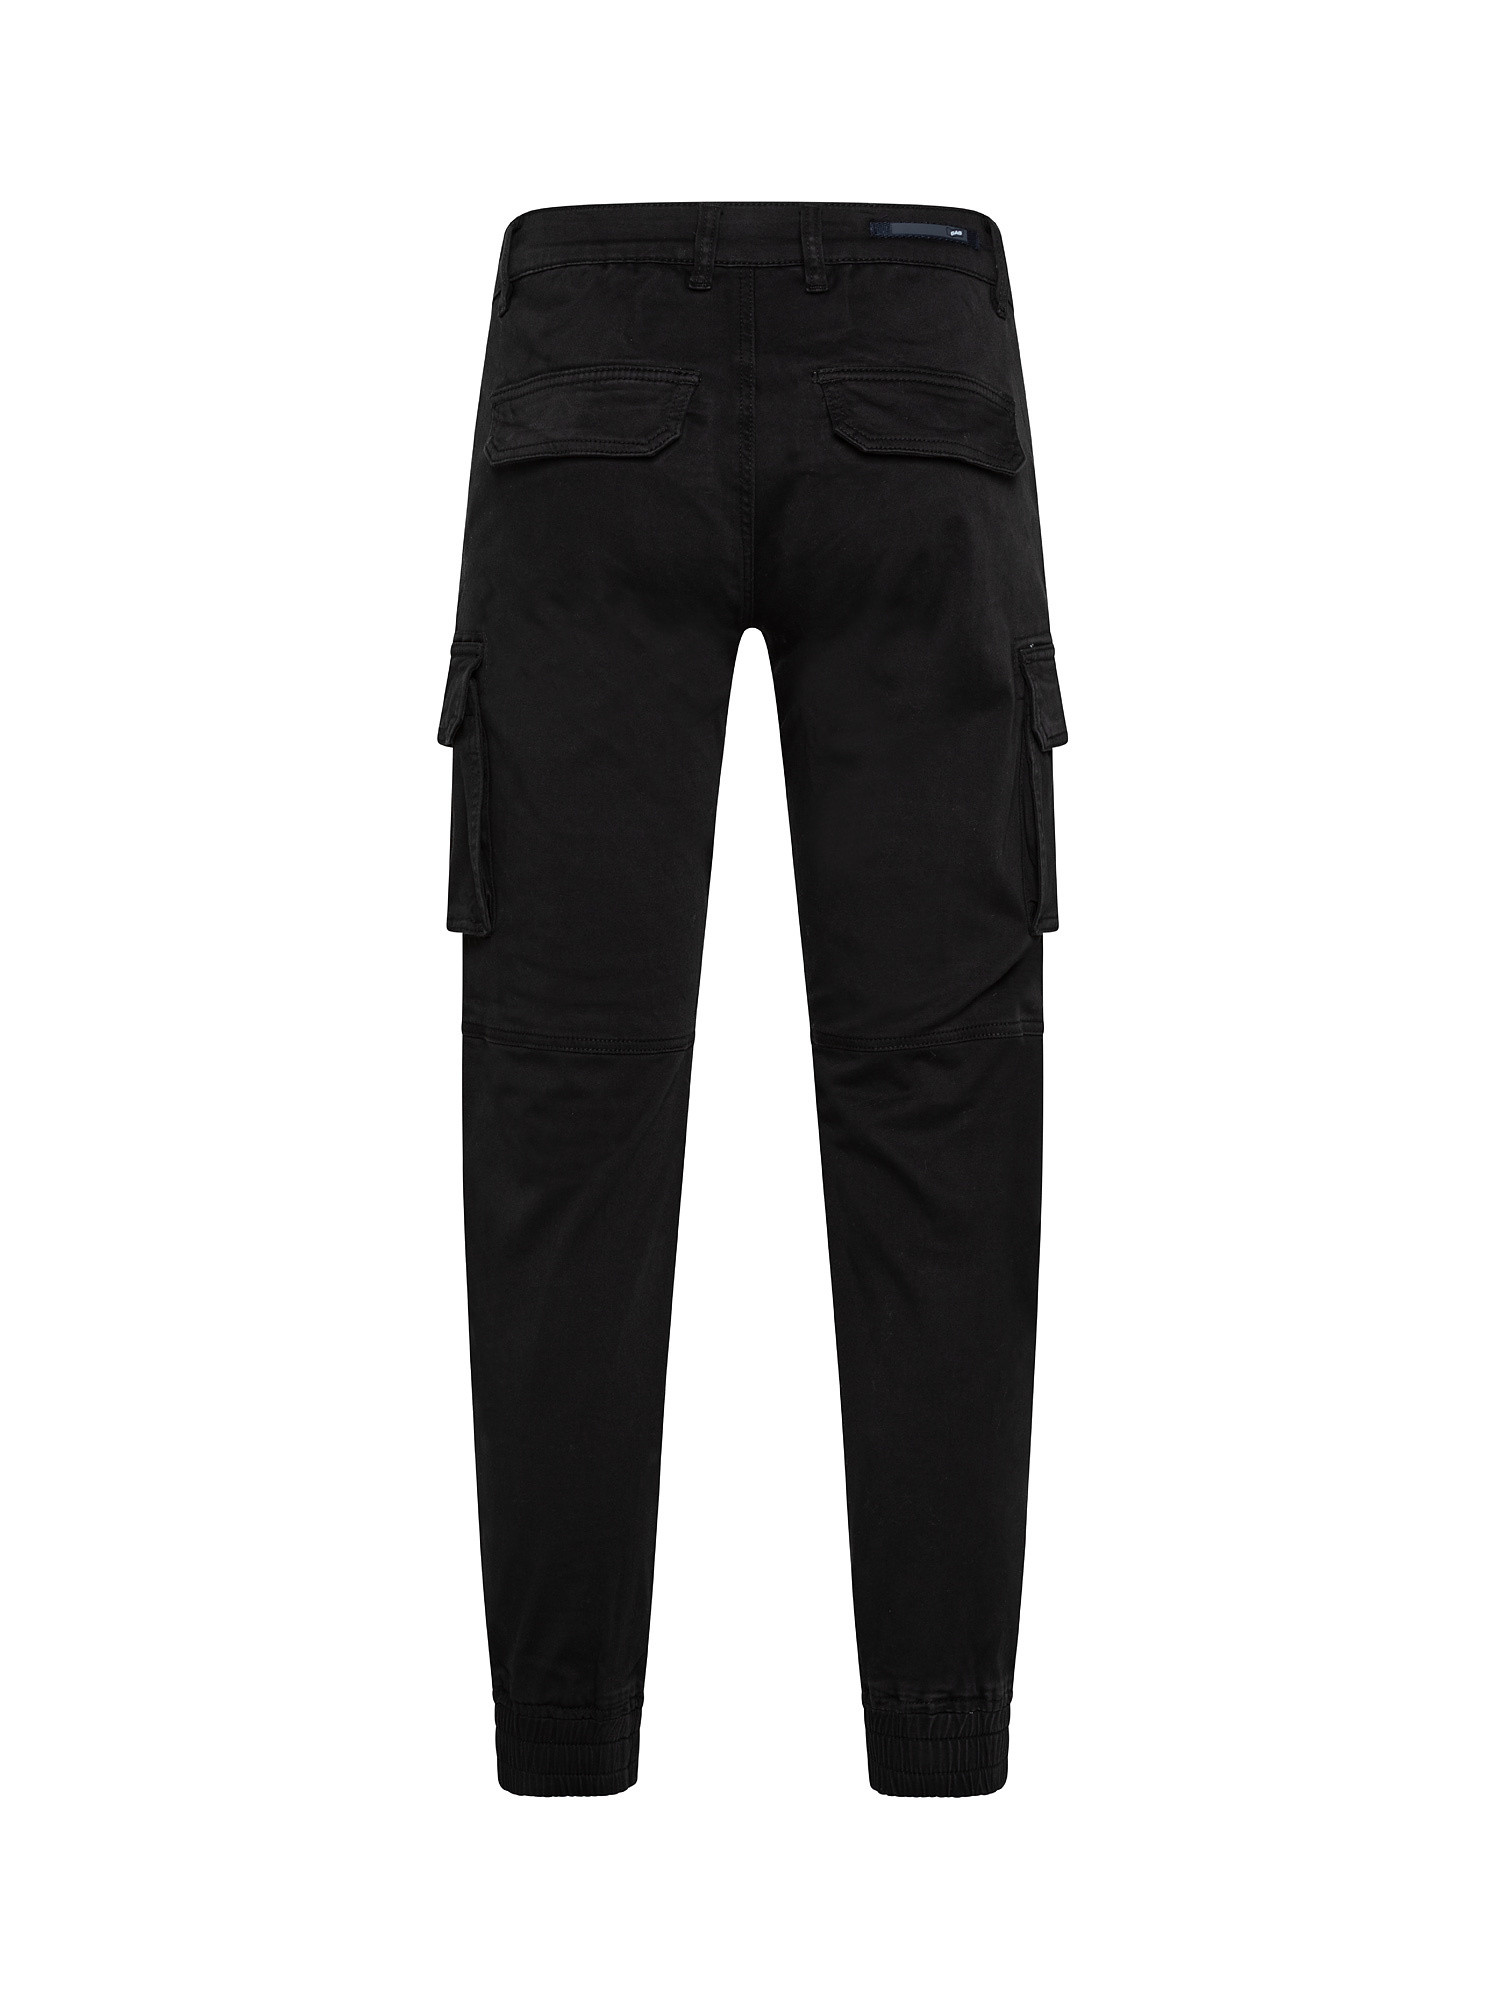 Pantalone cargo in cotone stretch, Nero, large image number 1